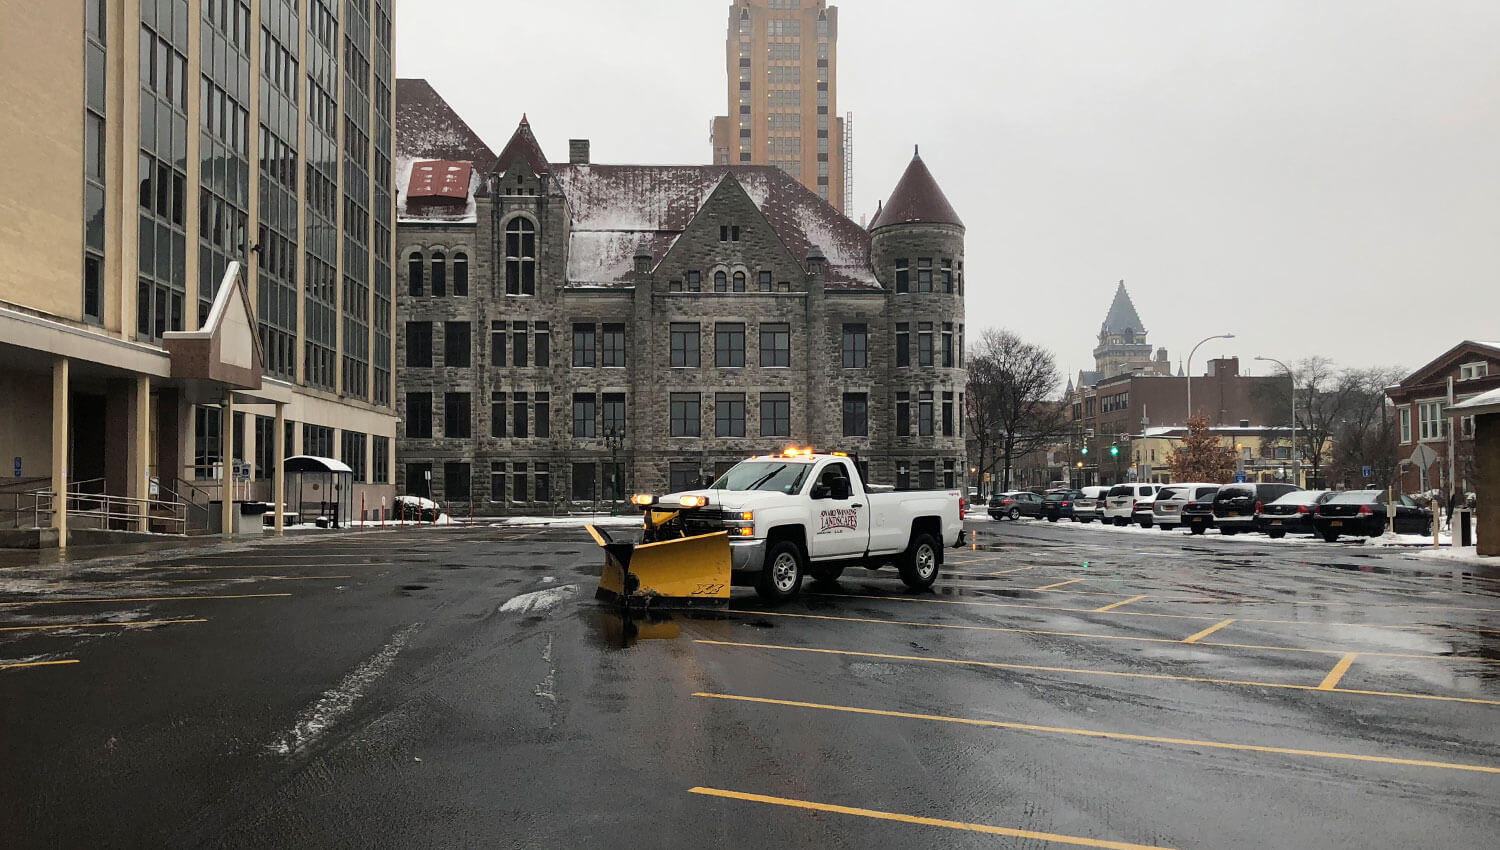 Commercial snow removal vehicles during a Central New york Winter